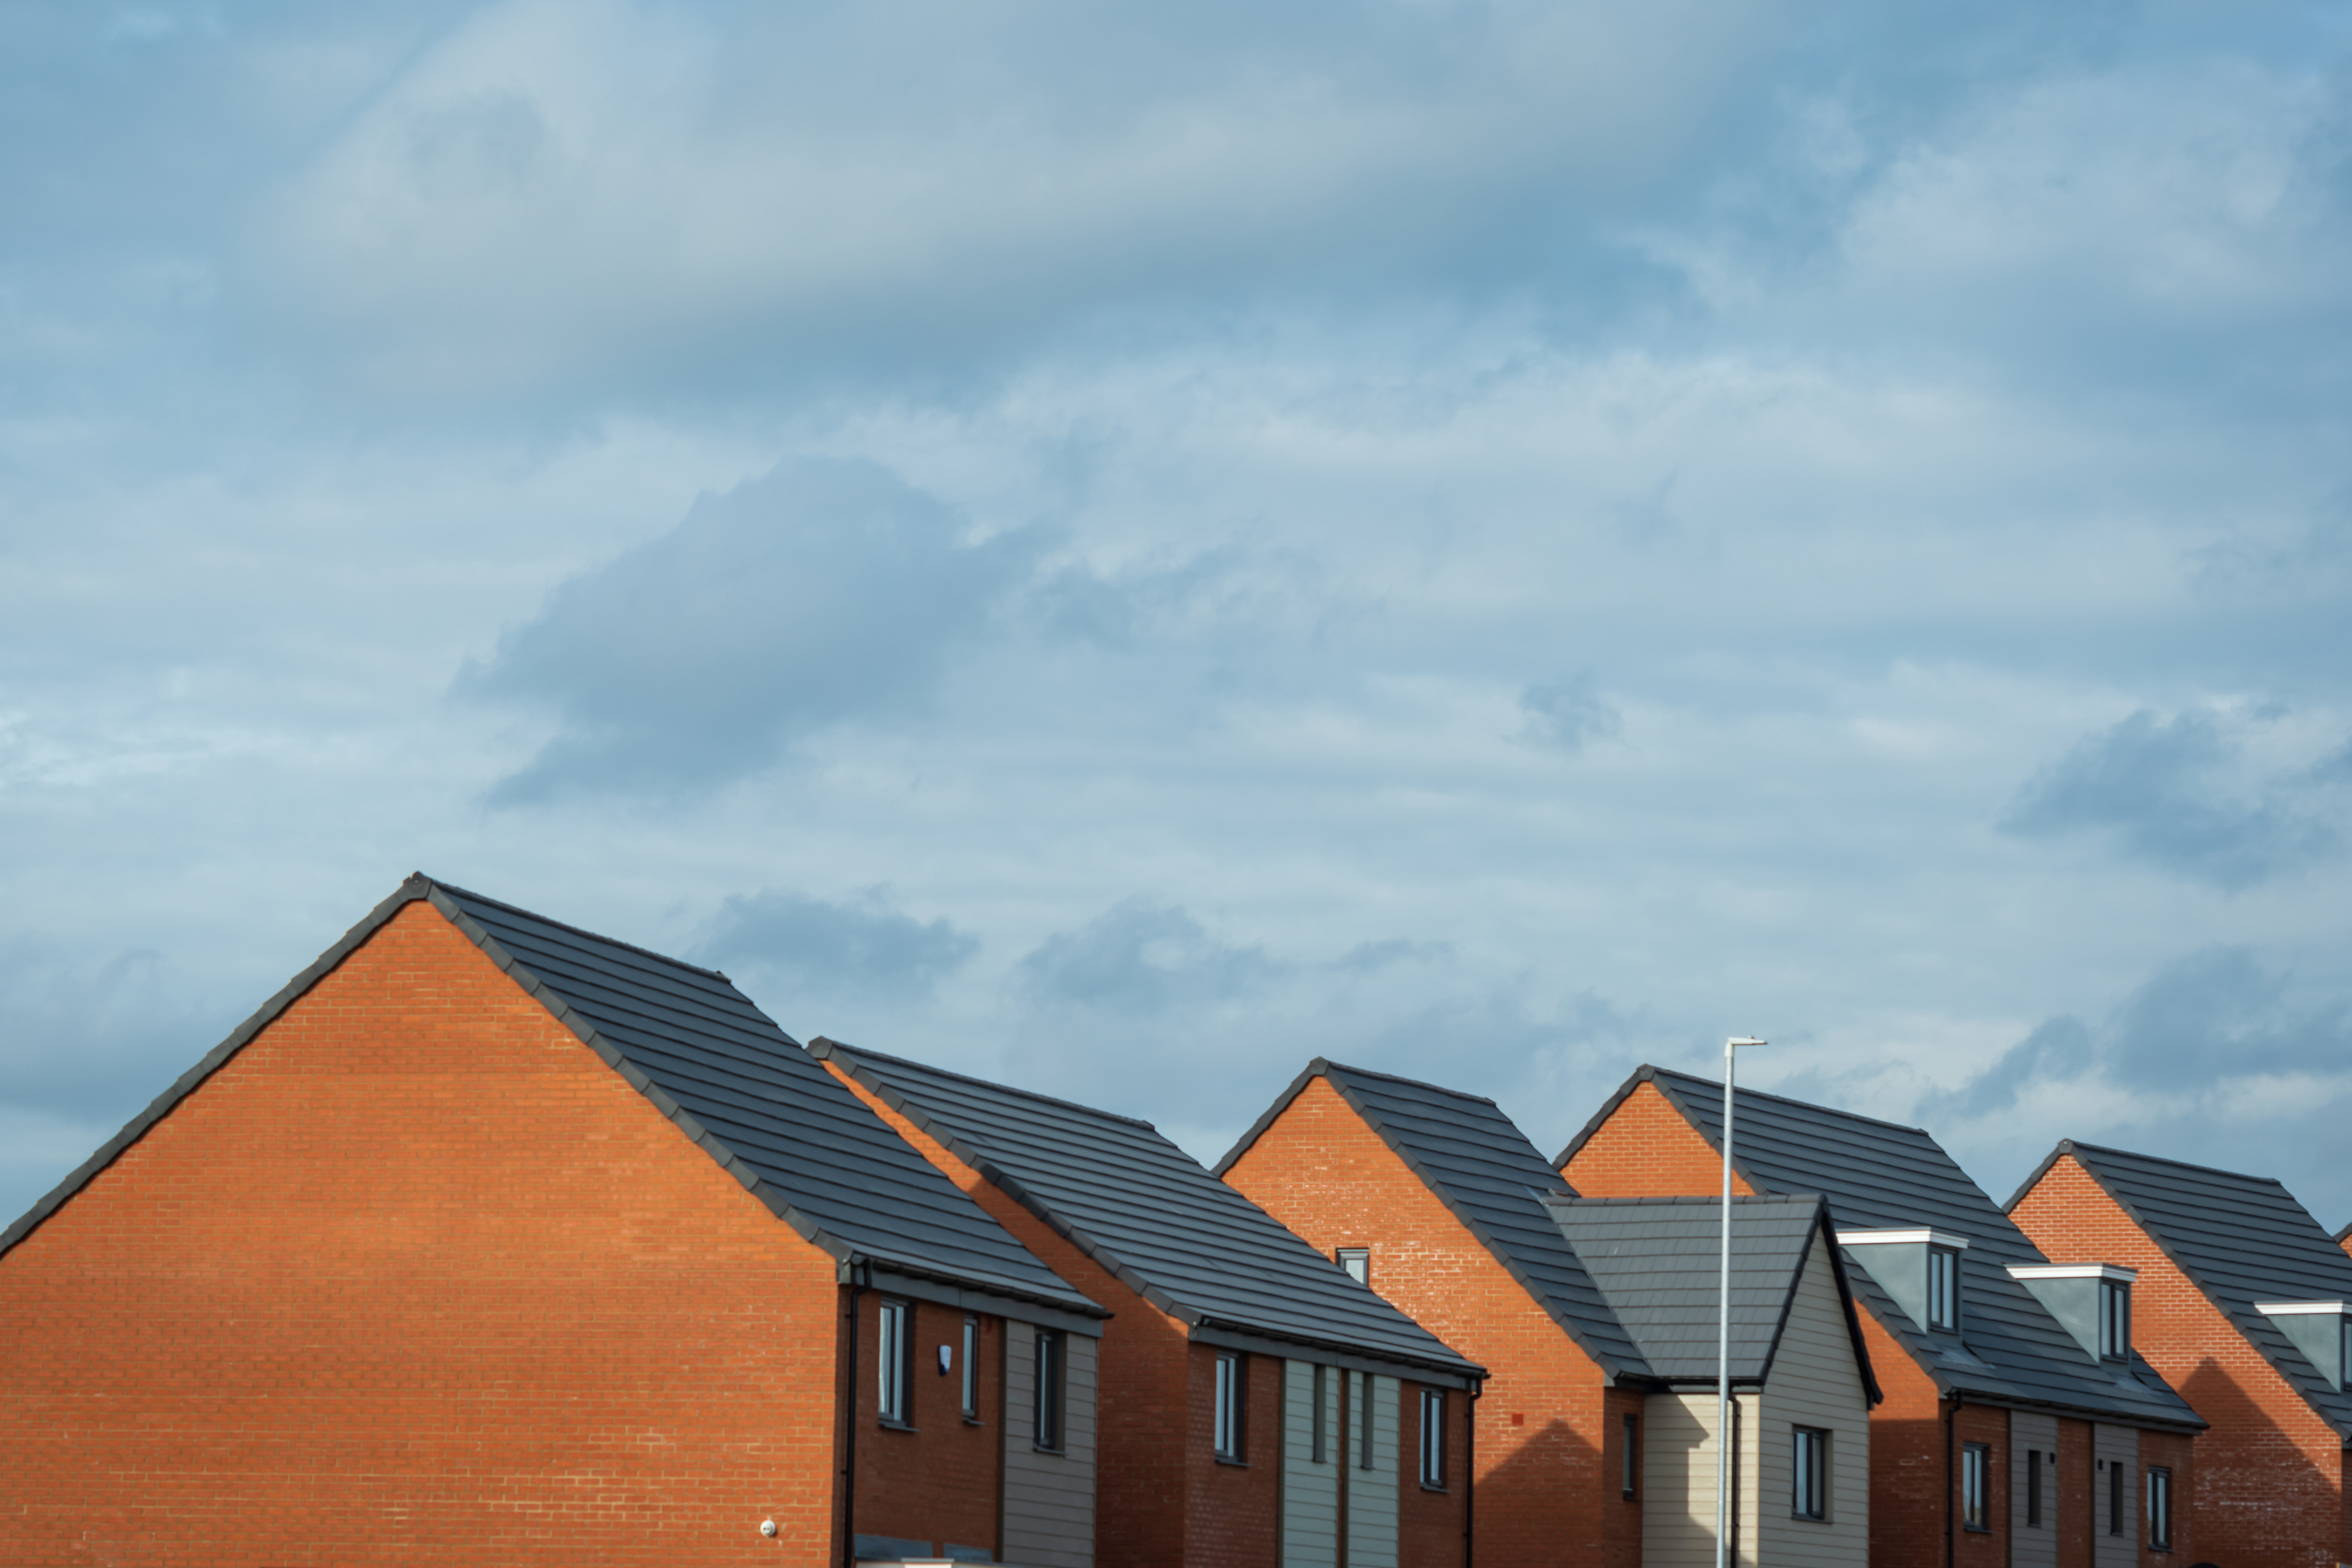 Rooftops of new-build homes